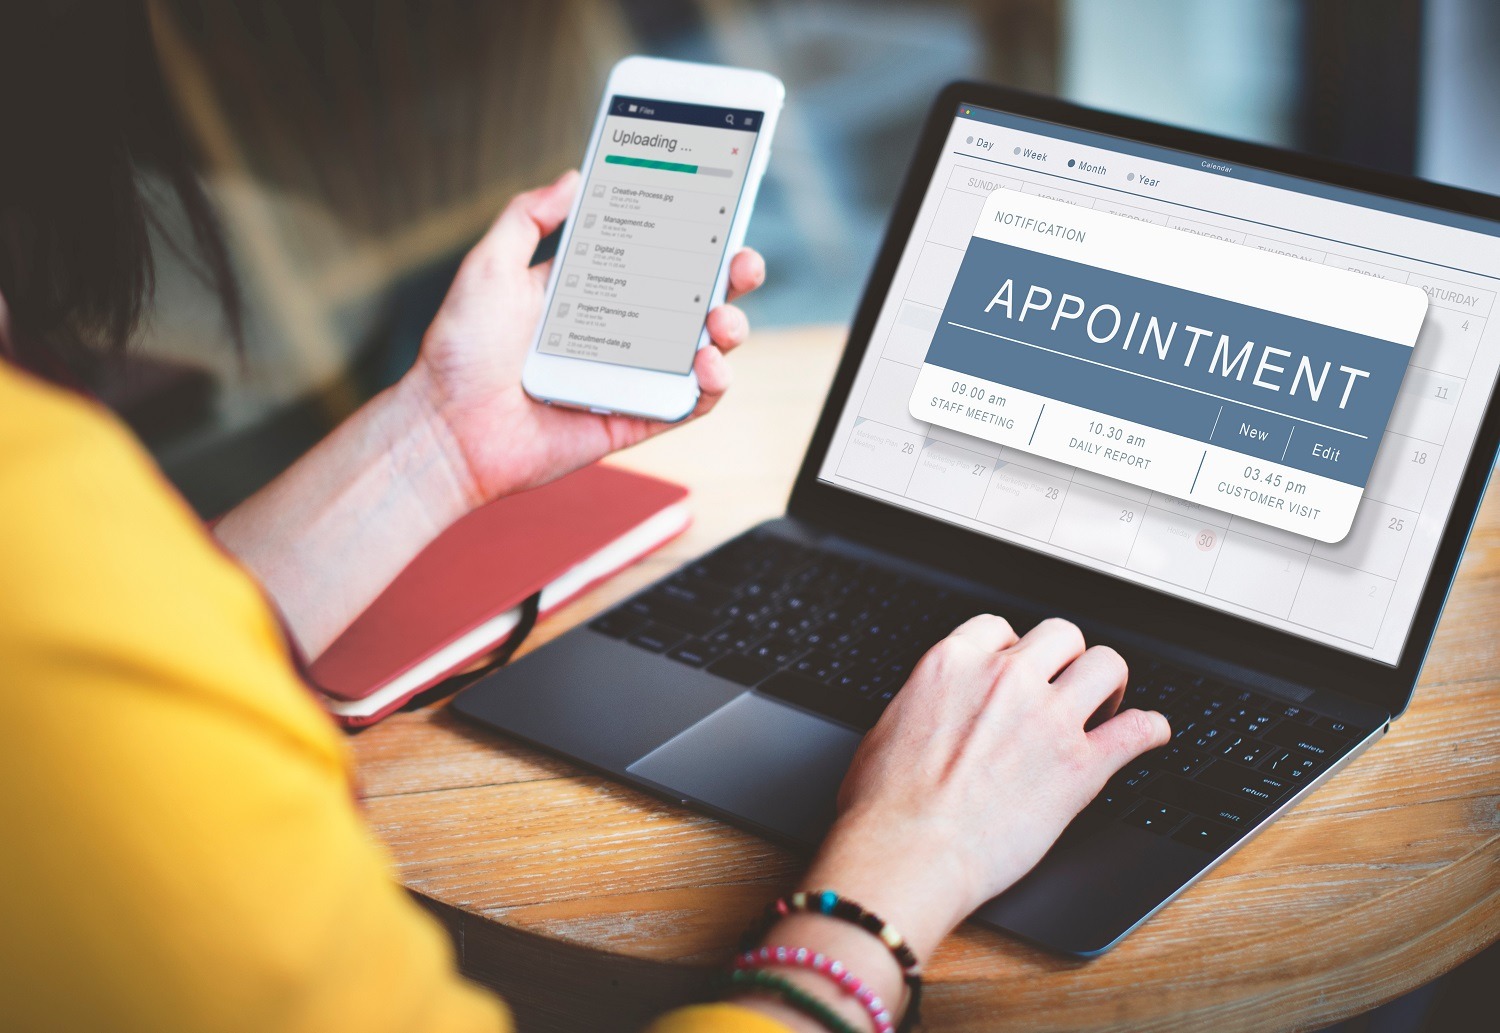 3 ways outsourcing your appointment scheduling can help your business